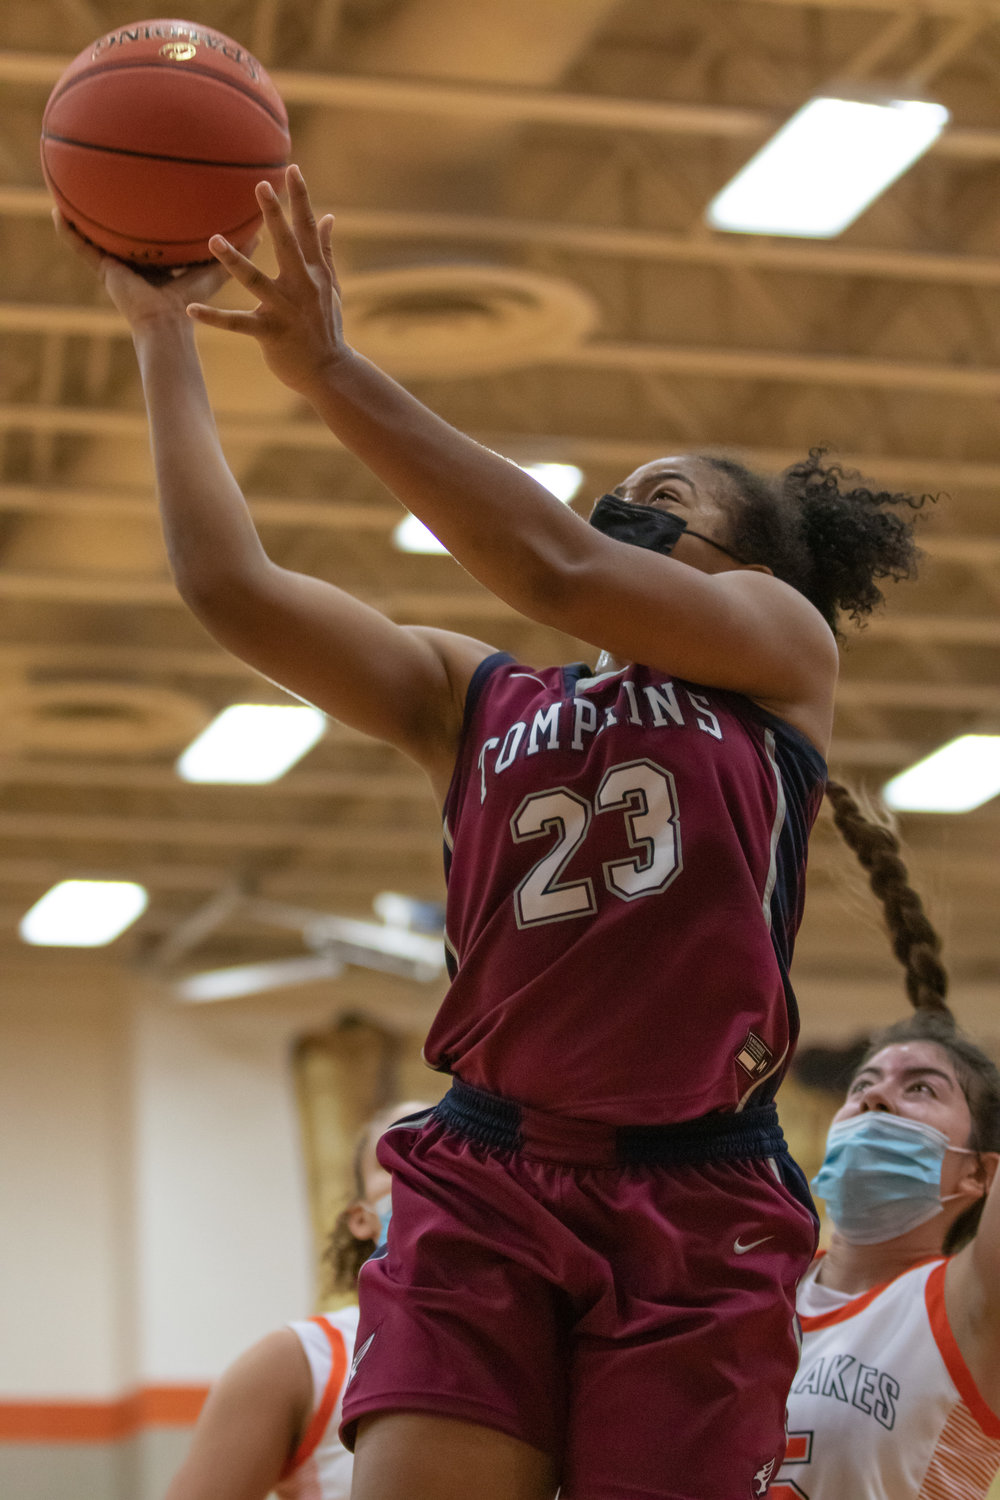 Tompkins sophomore guard Loghan Johnson, shown here during an earlier game this season at Seven Lakes High, scored 31 points in her team's 66-47 win over the Spartans on Jan. 22 that secured the program's second straight district championship.